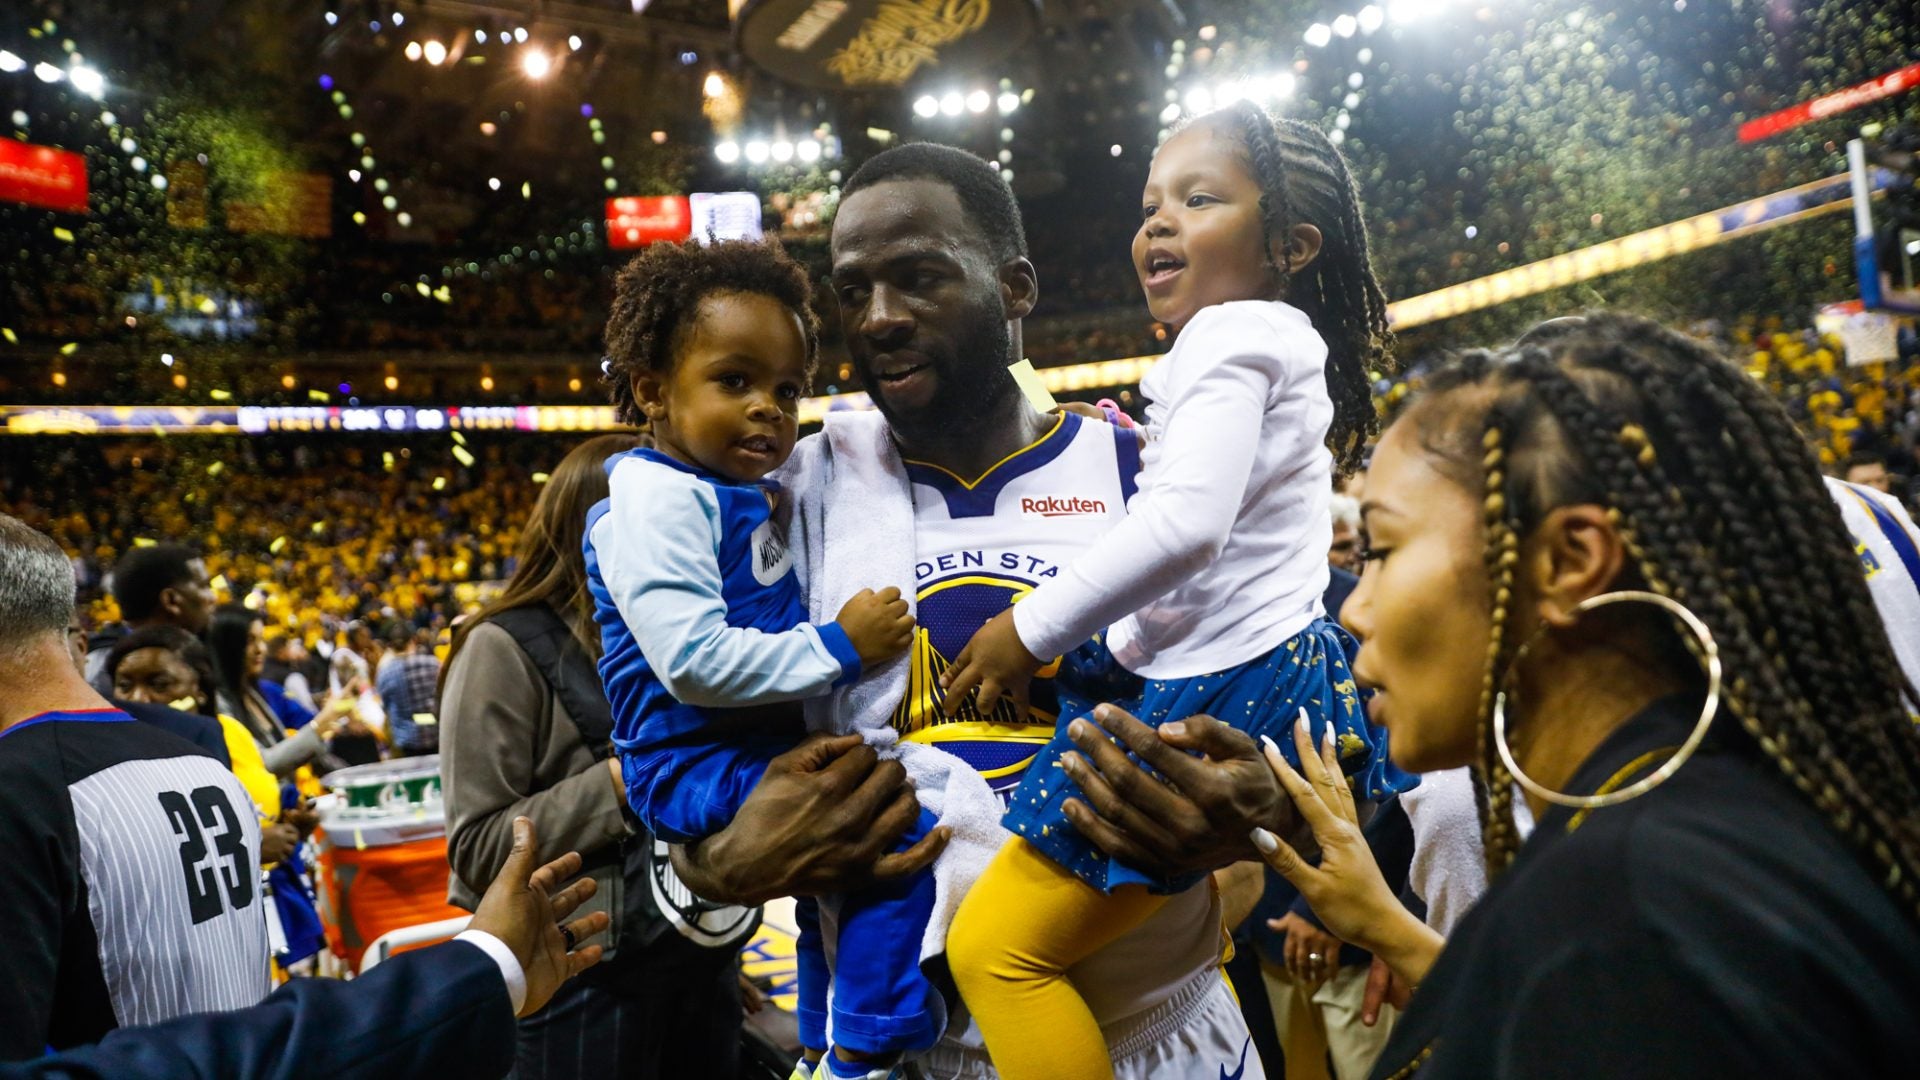 NBA Champ Draymond Green Shares How He Spends Quality Time With His Kids When On The Road, And Why Fiancée Hazel Renee Is His MVP